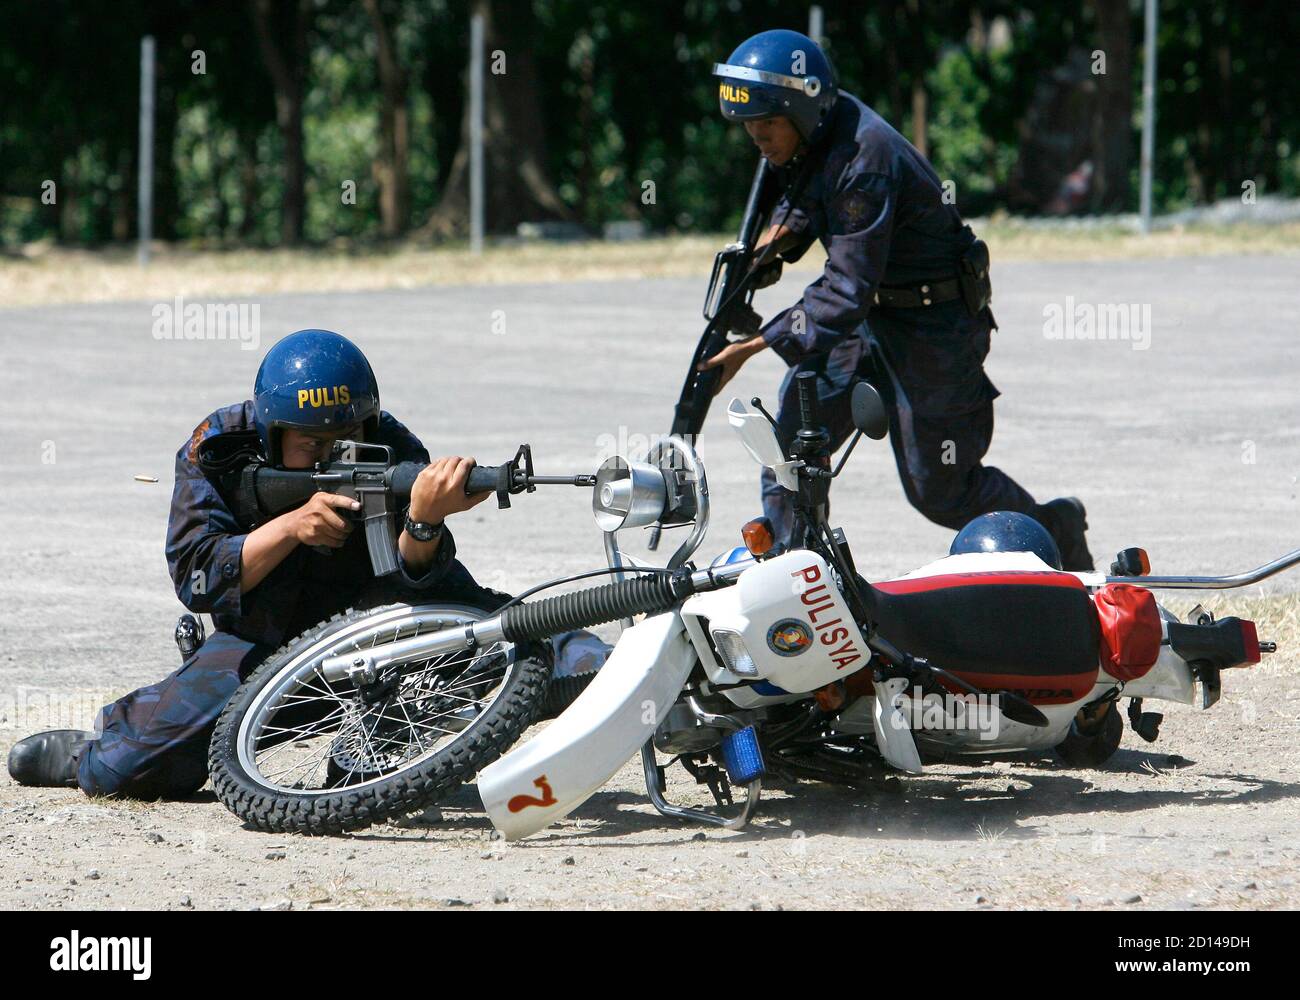 Philippine National Police (PNP) members of the Regional Mobile Group (RMG)  who completed the Basic Motorcycle Patrol Operation Training show their  skills during a live-fire exercise inside a police headquarters in Taguig